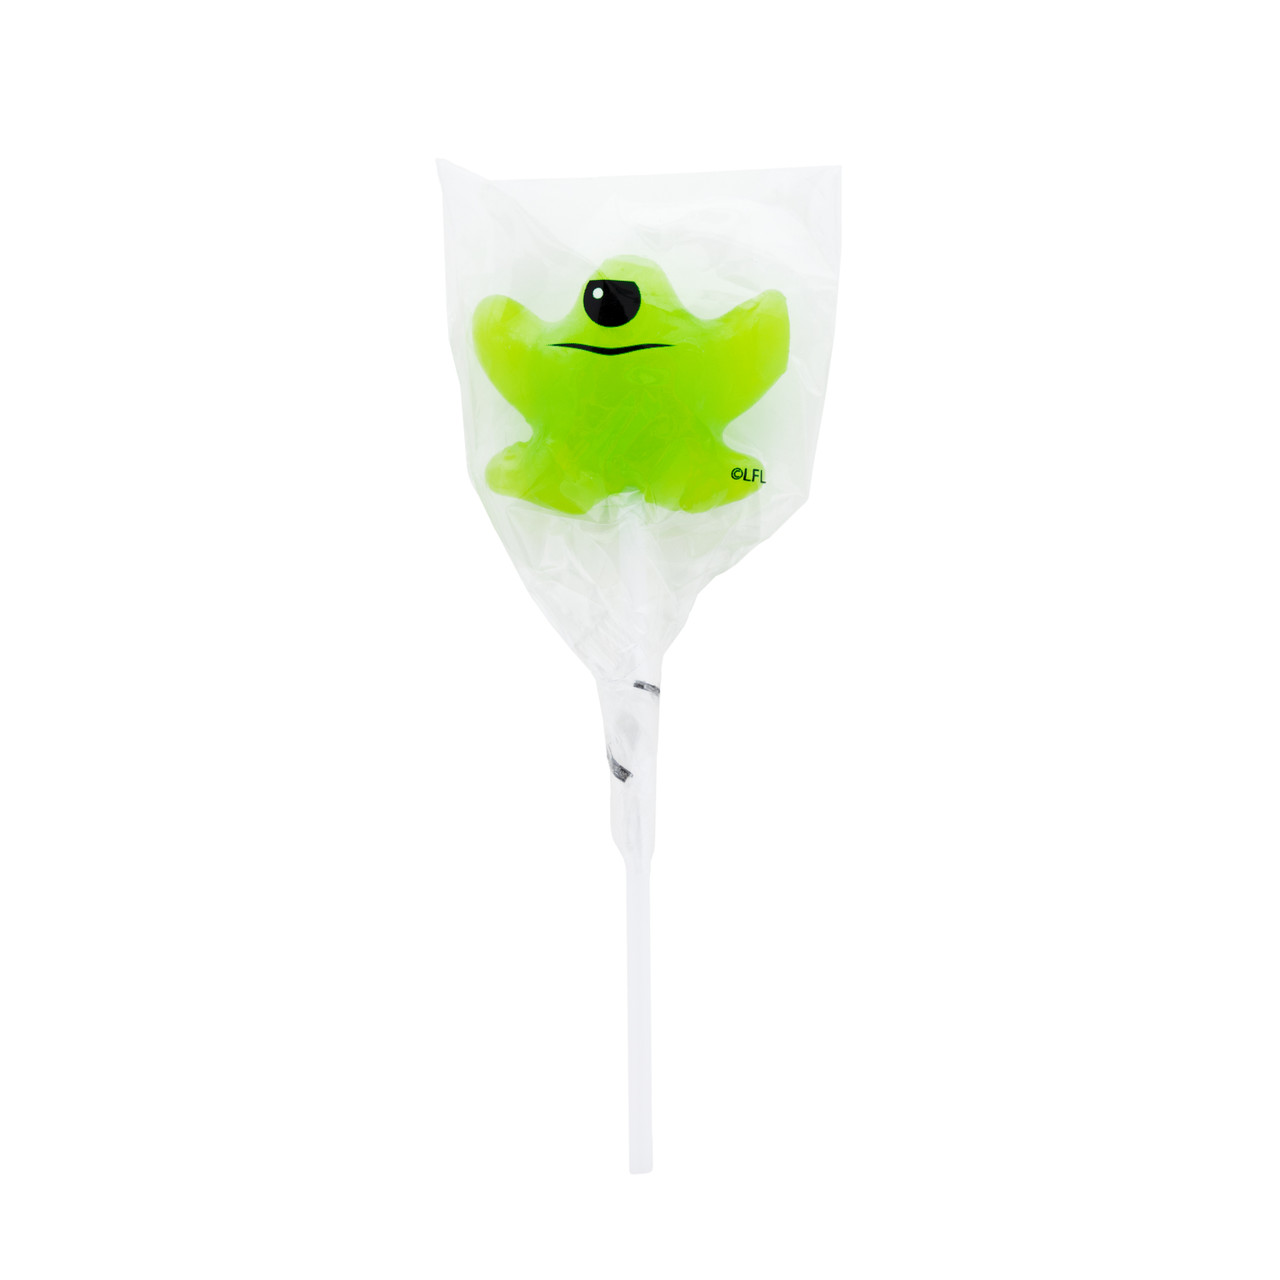 Star Wars Yoda Goblet With Conversation Heart - Eat The Candy Force! 